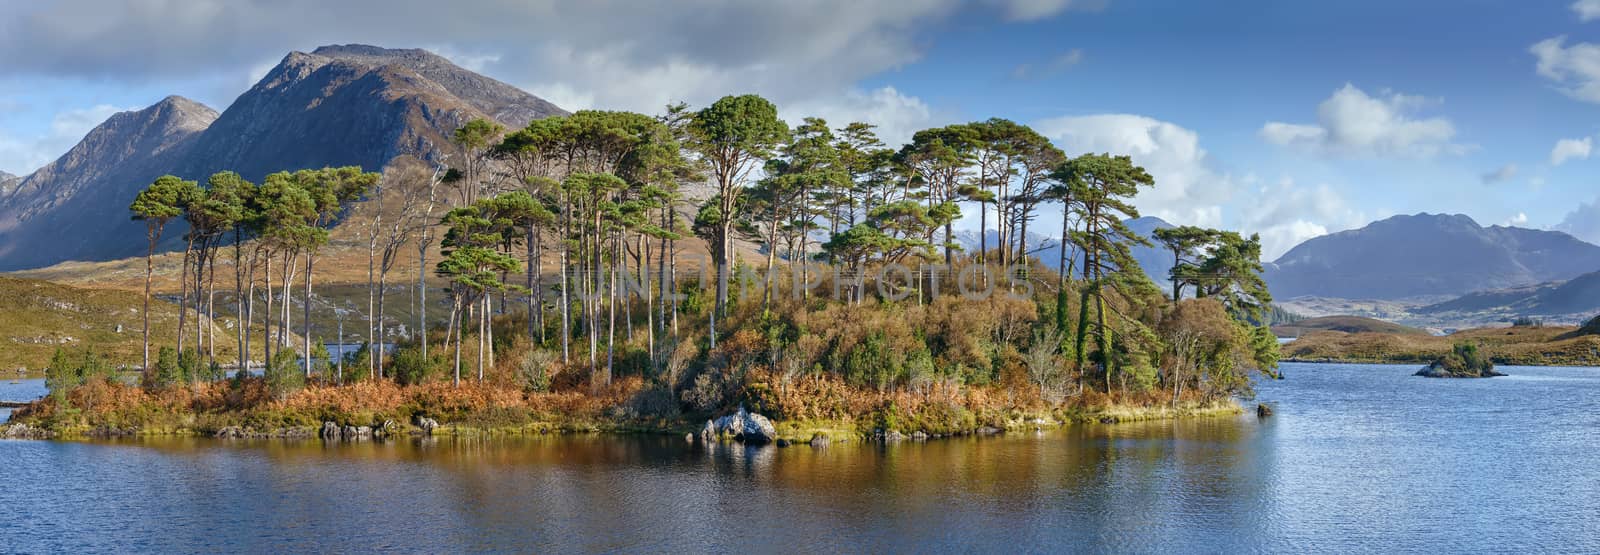 Panoramic landscape with lake from Pines Island Viewpoint in Galway county, Ireland